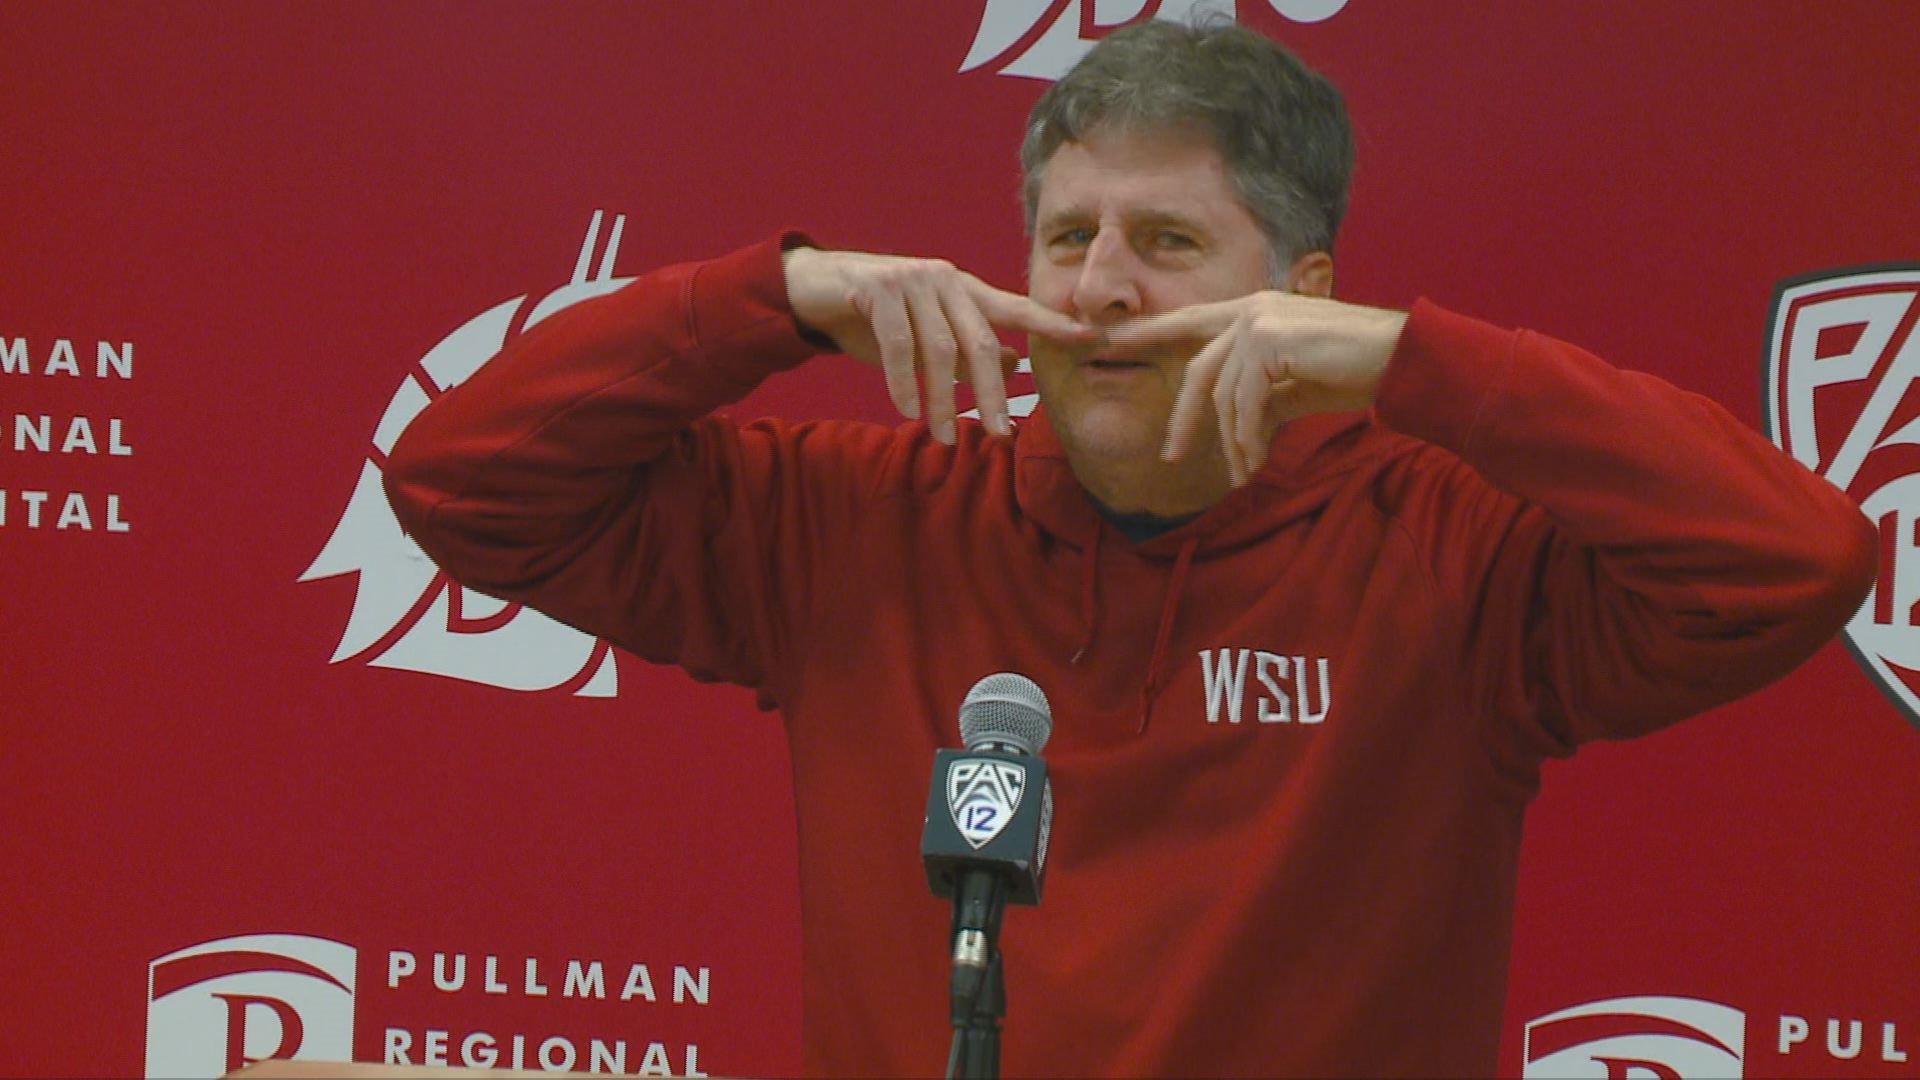 Leach's press conferences in 2019 have certainly not been boring.